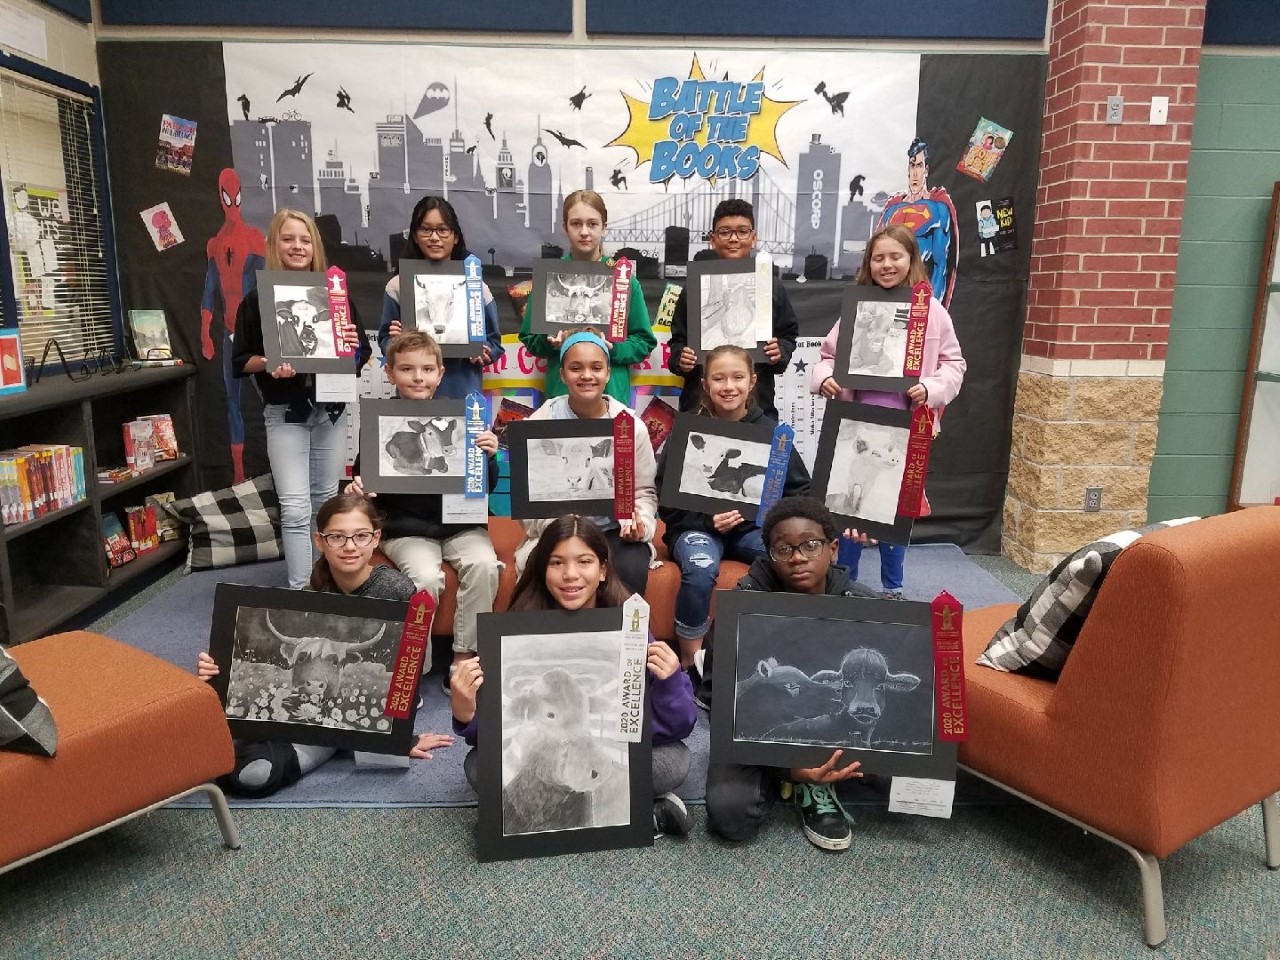 "Students hold up the artwork they created"